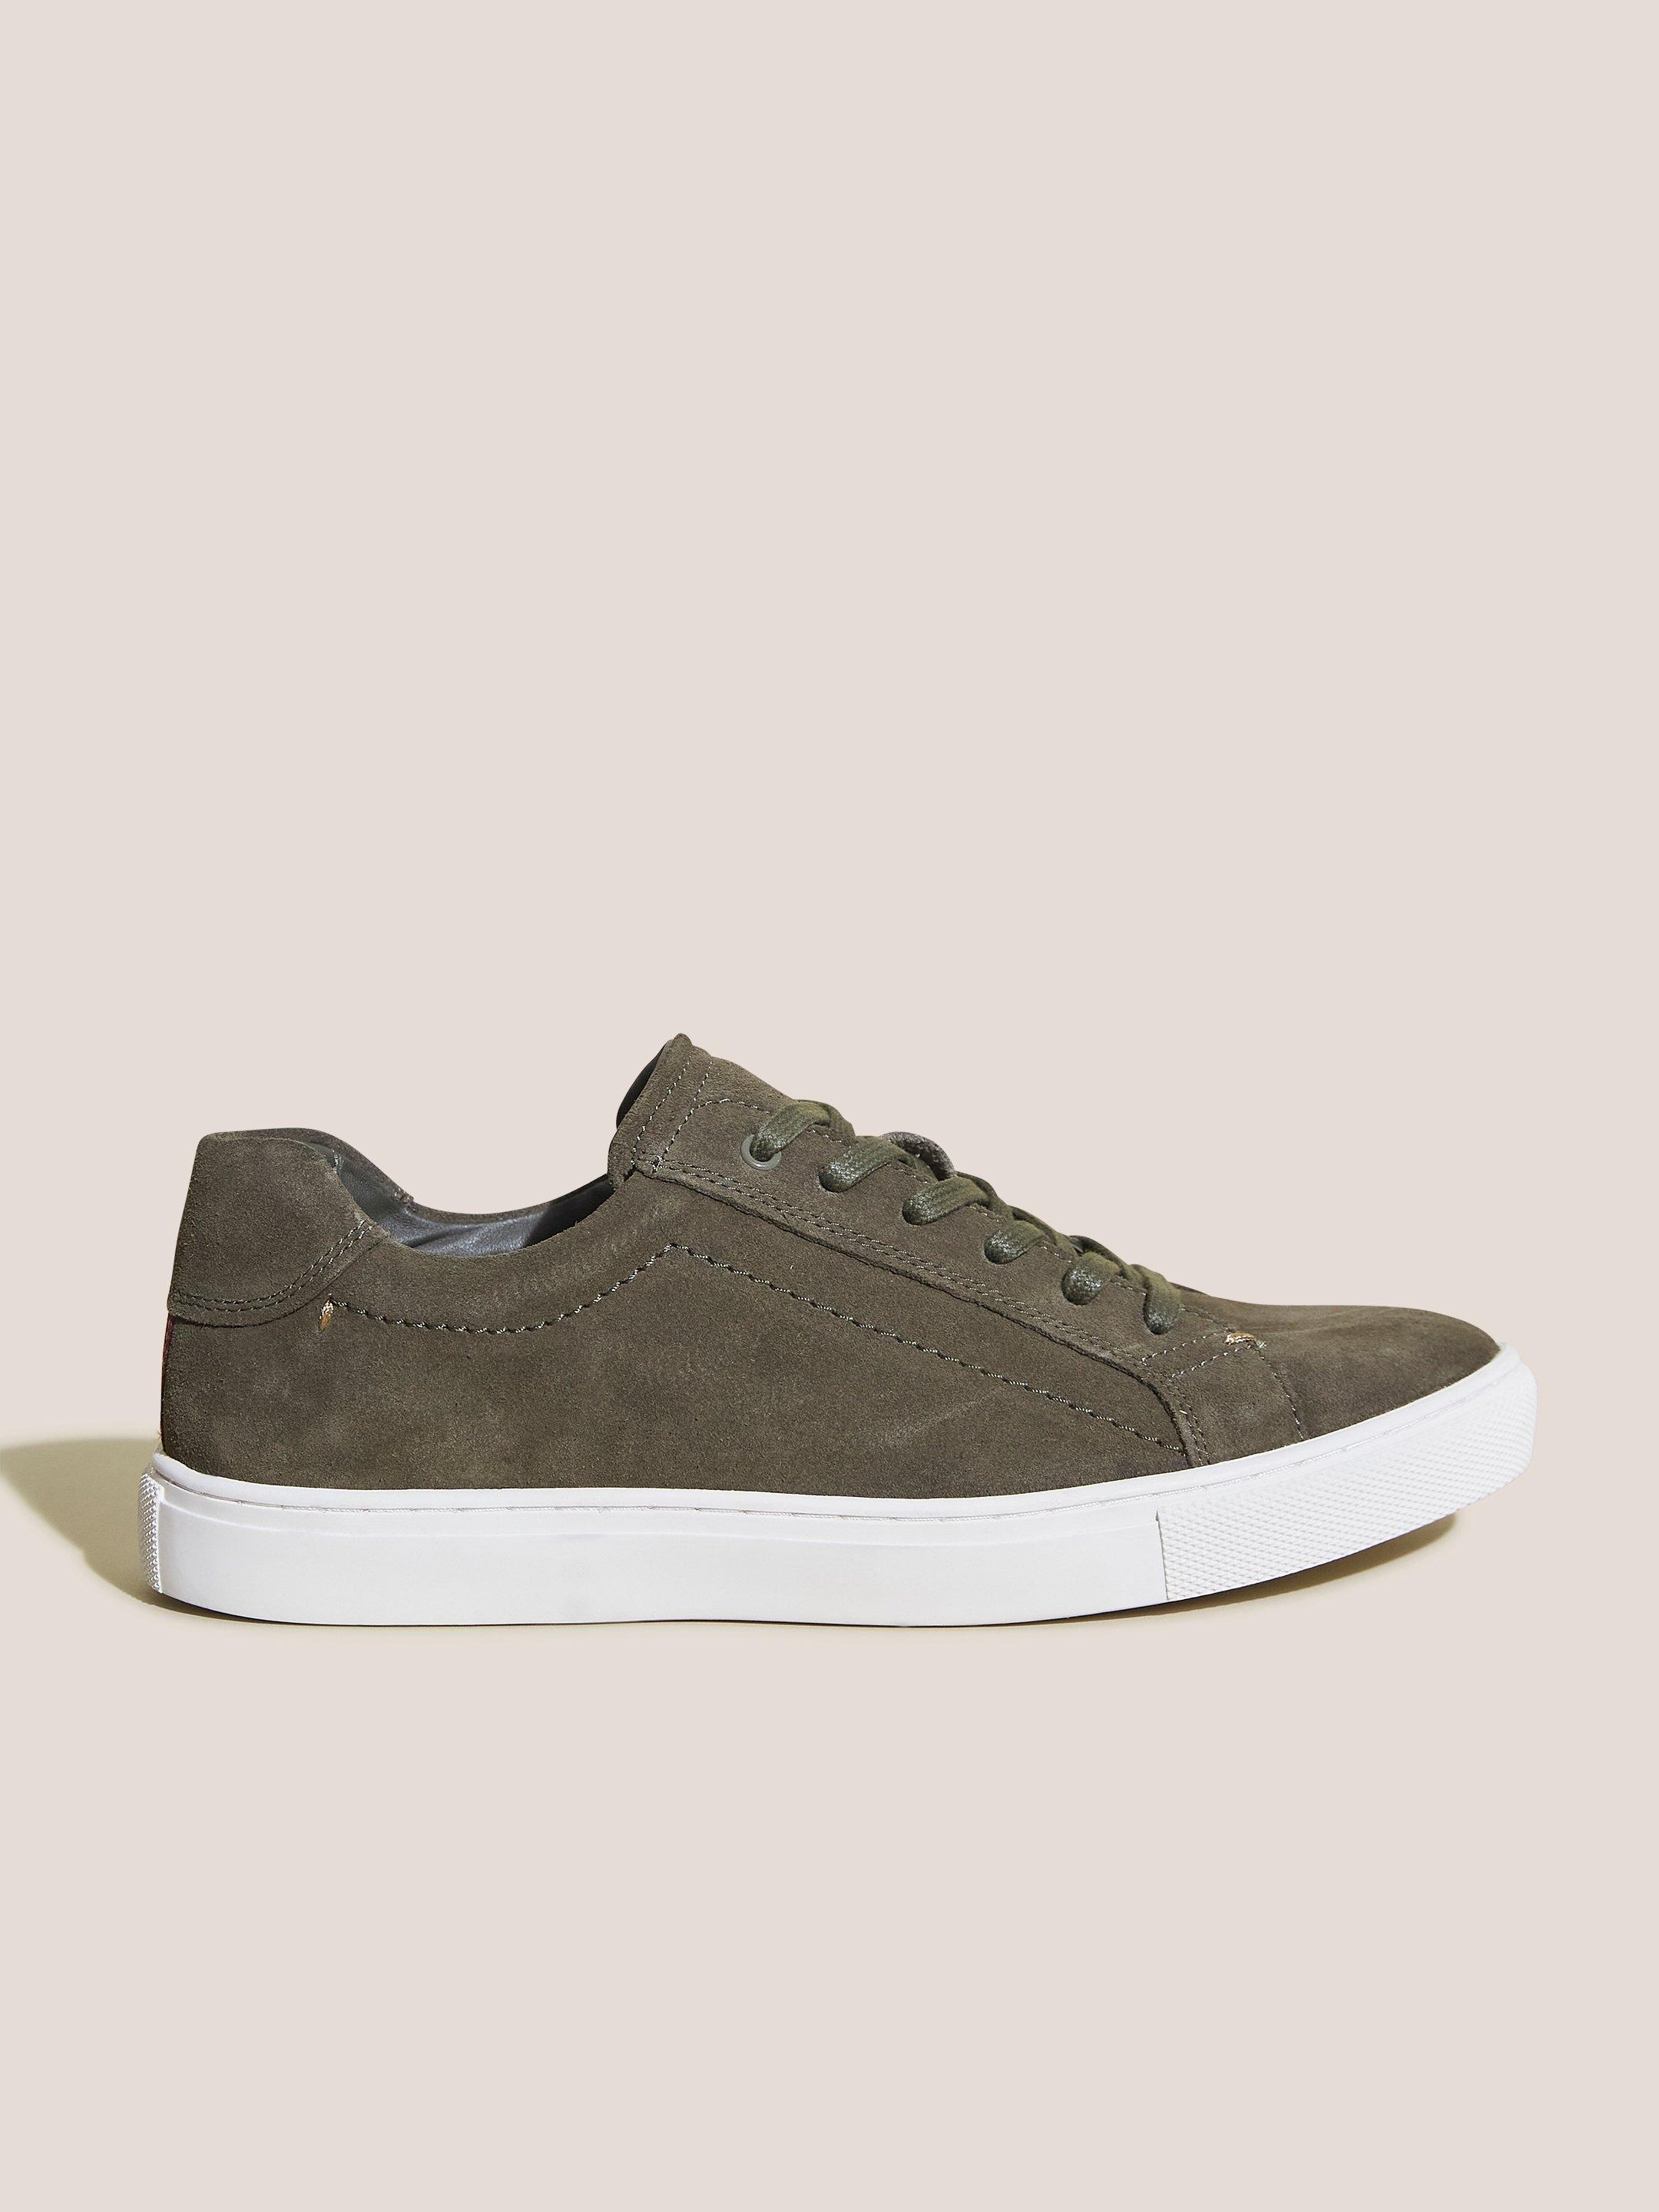 Woody Leather Trainer in KHAKI GRN - MODEL FRONT